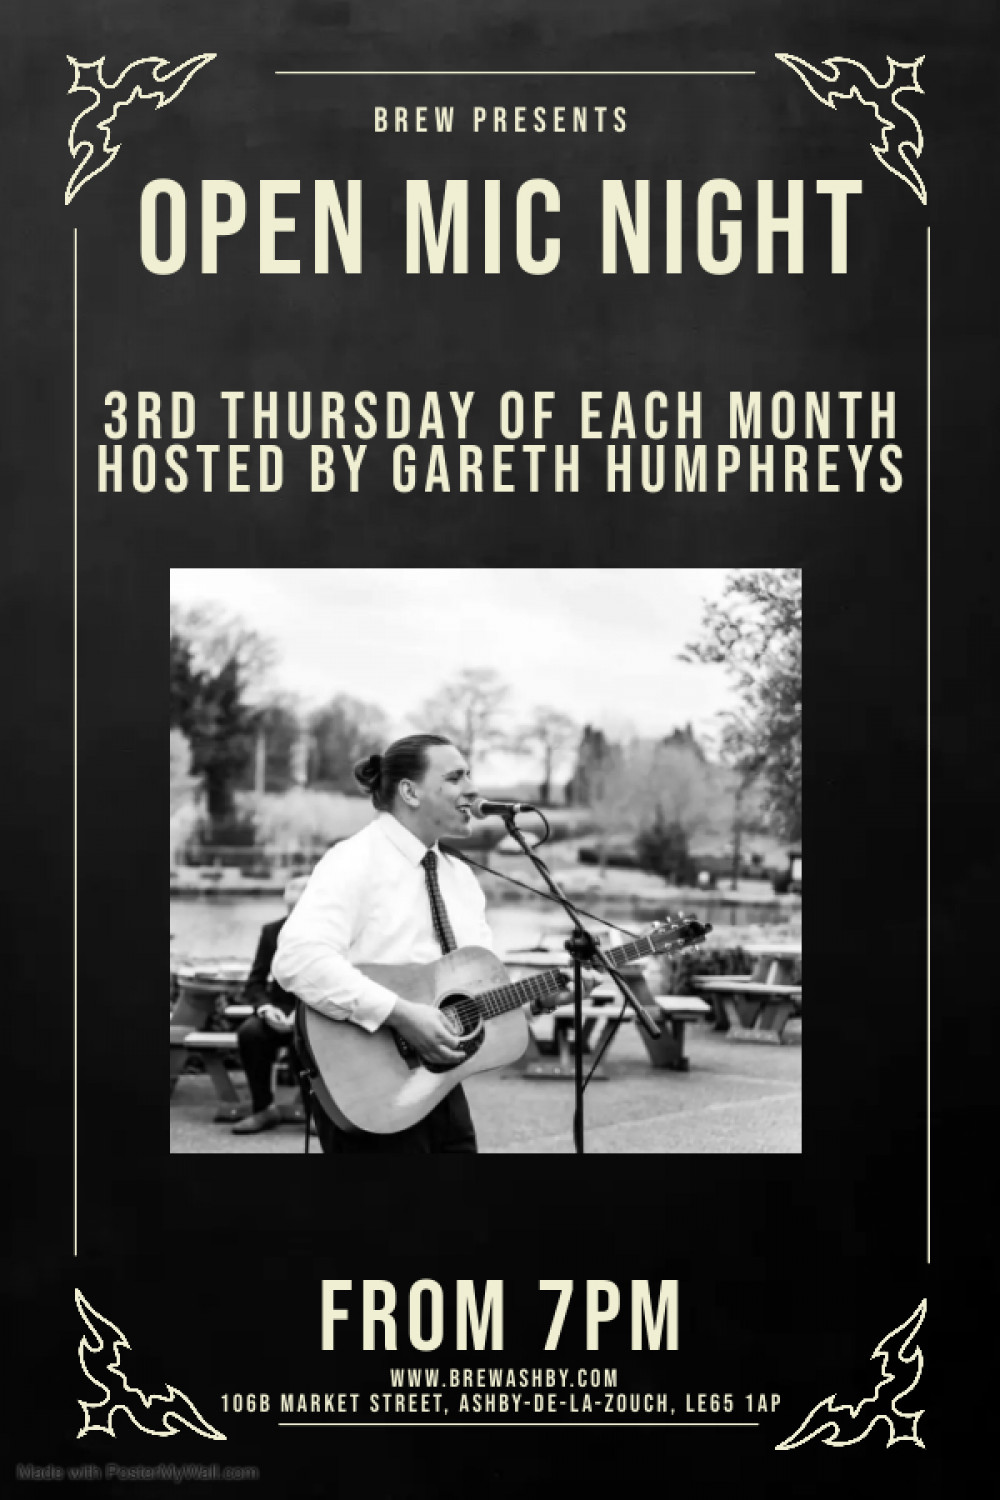 Open Mic Night Hosted by Gareth Humphreys at Brew, 106B Market Street, Ashby-de-la-Zouch